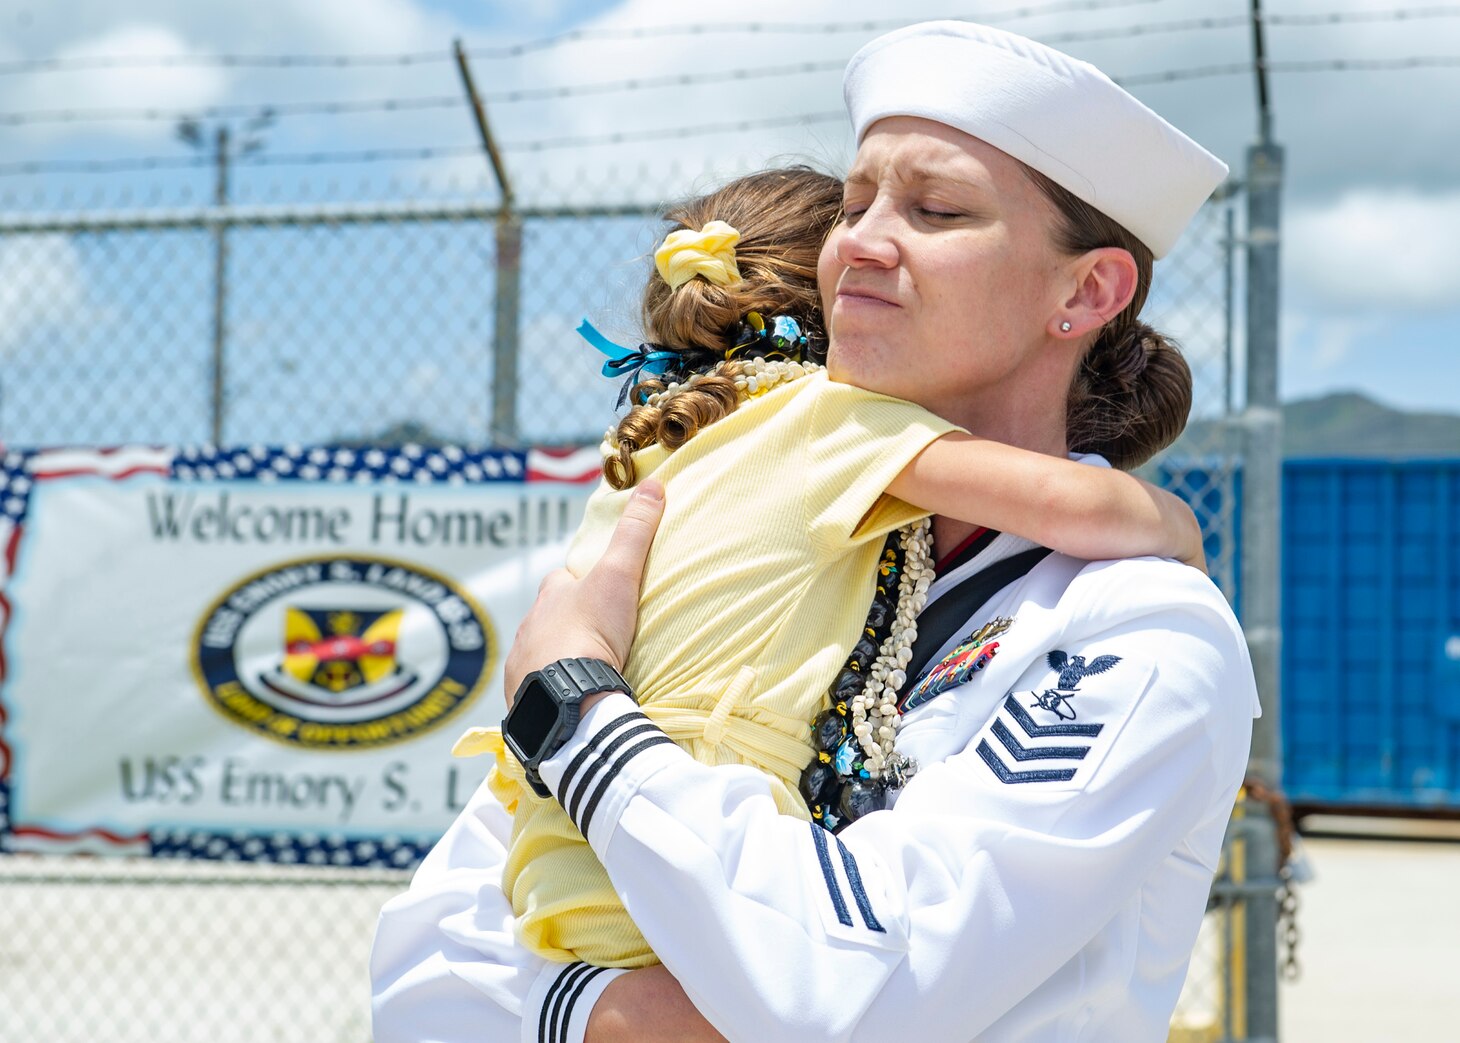 USS Emory S. Land (AS 39) returns to Naval Base Guam following a maintenance period at Mare Island Dry Dock.